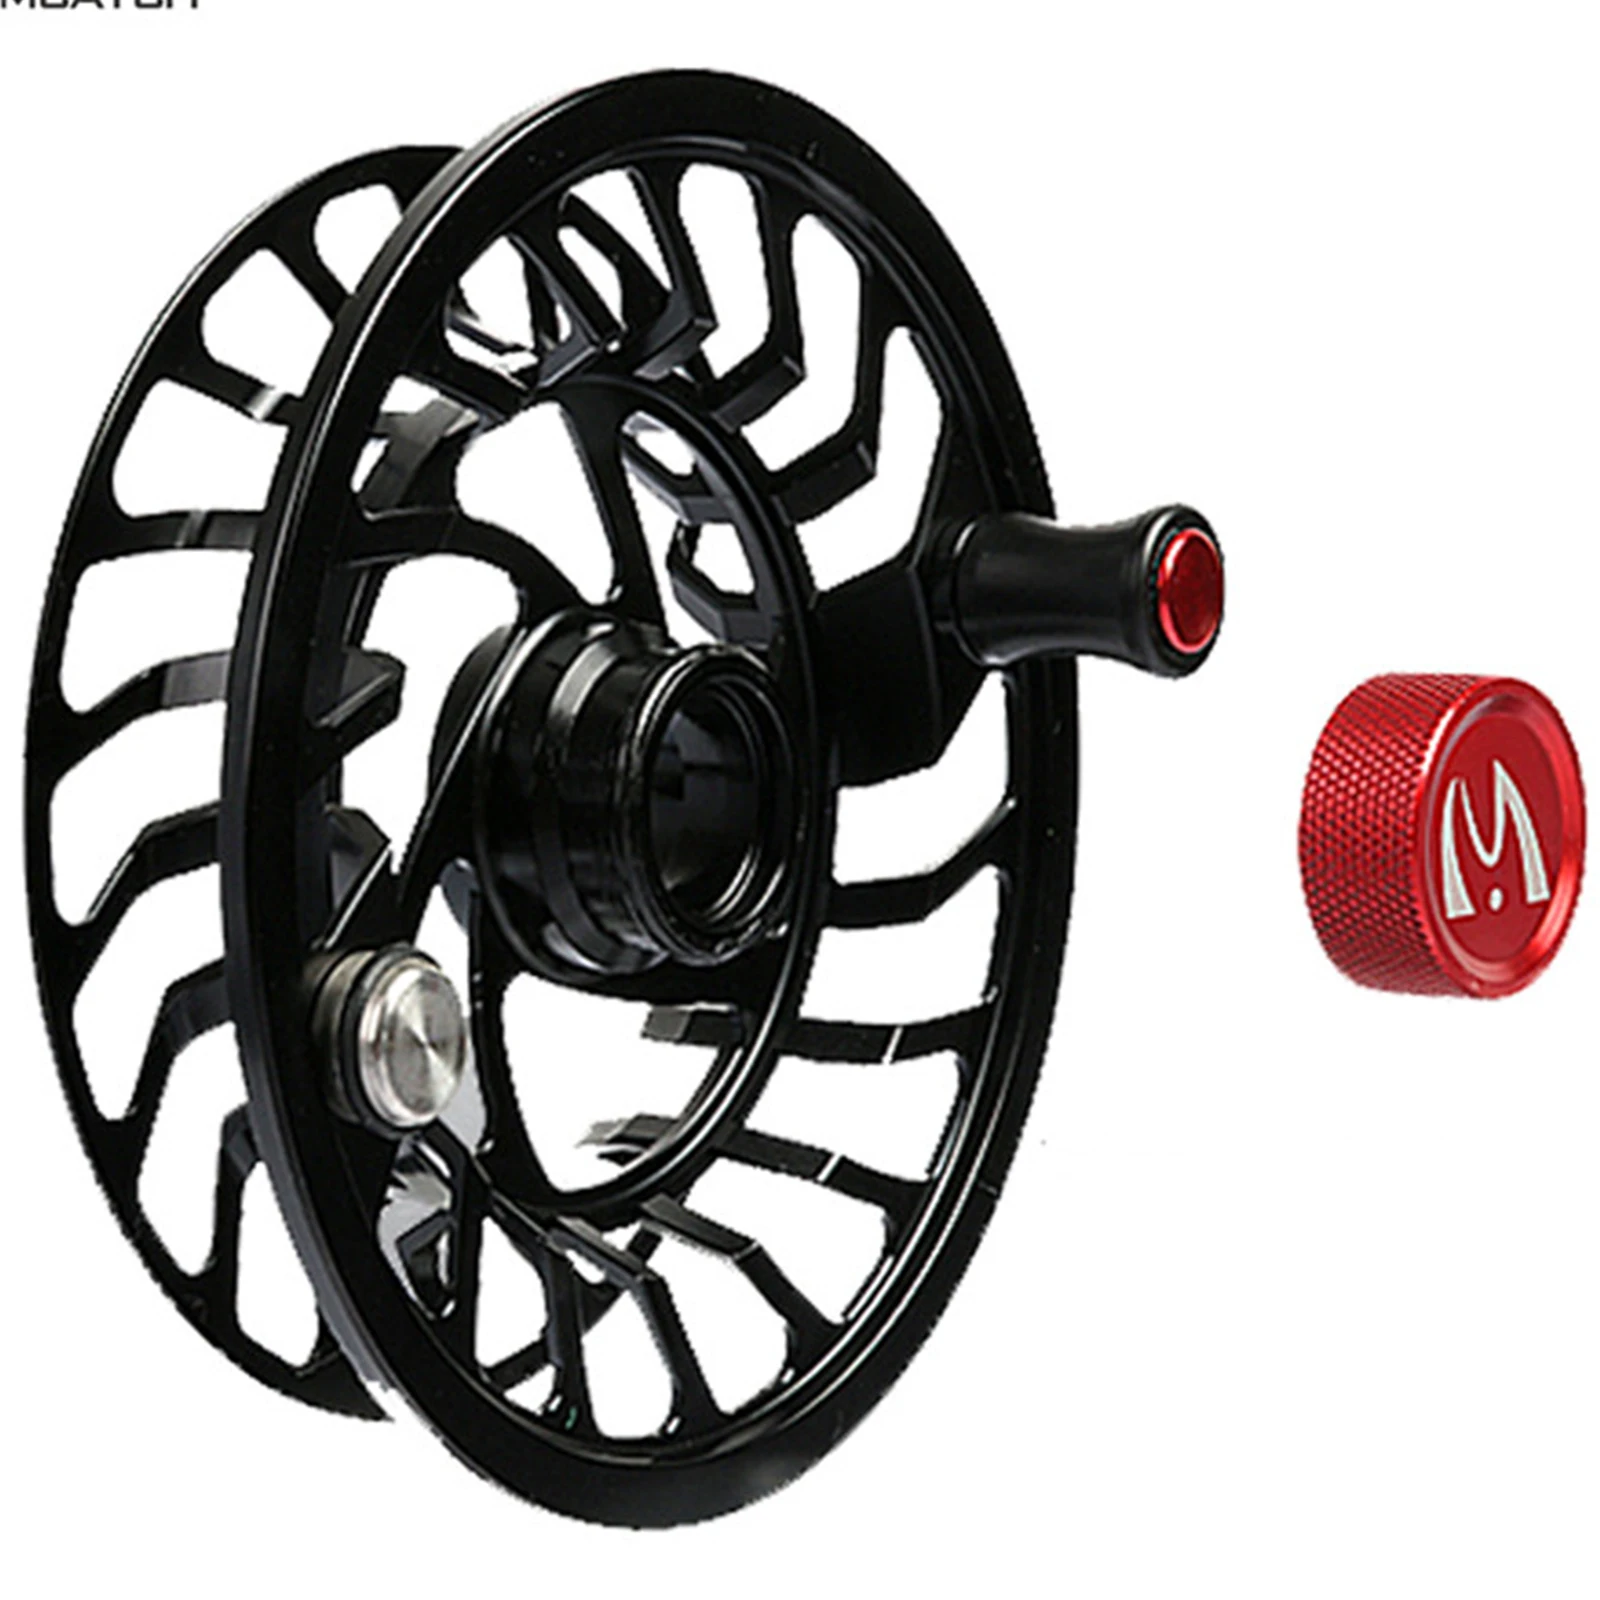 Maximumcatch Maxcatch Saltwater Fly Fishing Reel 100% Fully